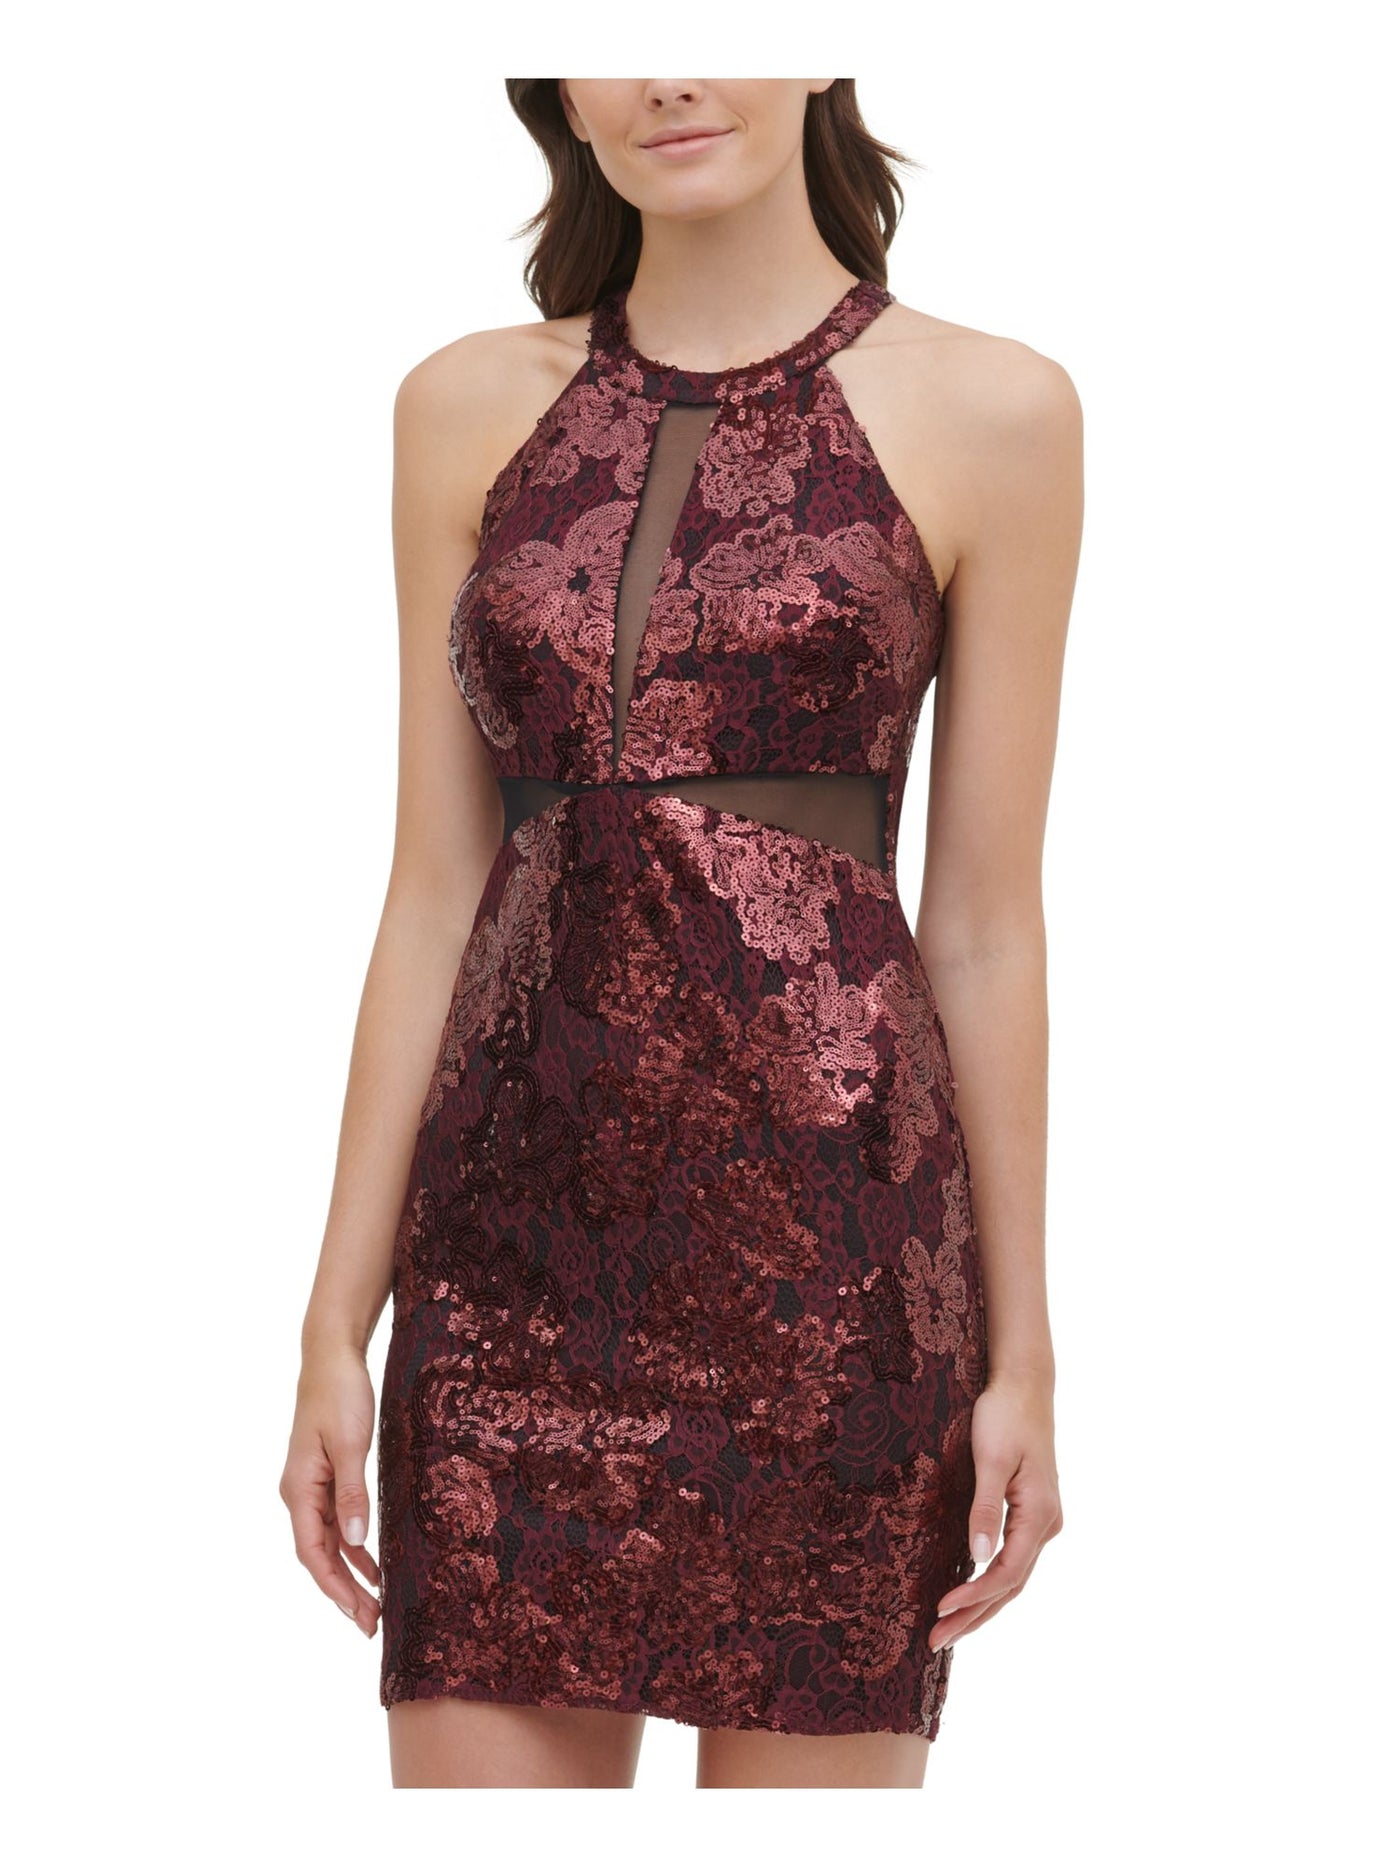 GUESS Womens Burgundy Sequined Zippered Sleeveless Halter Short Party Body Con Dress 0